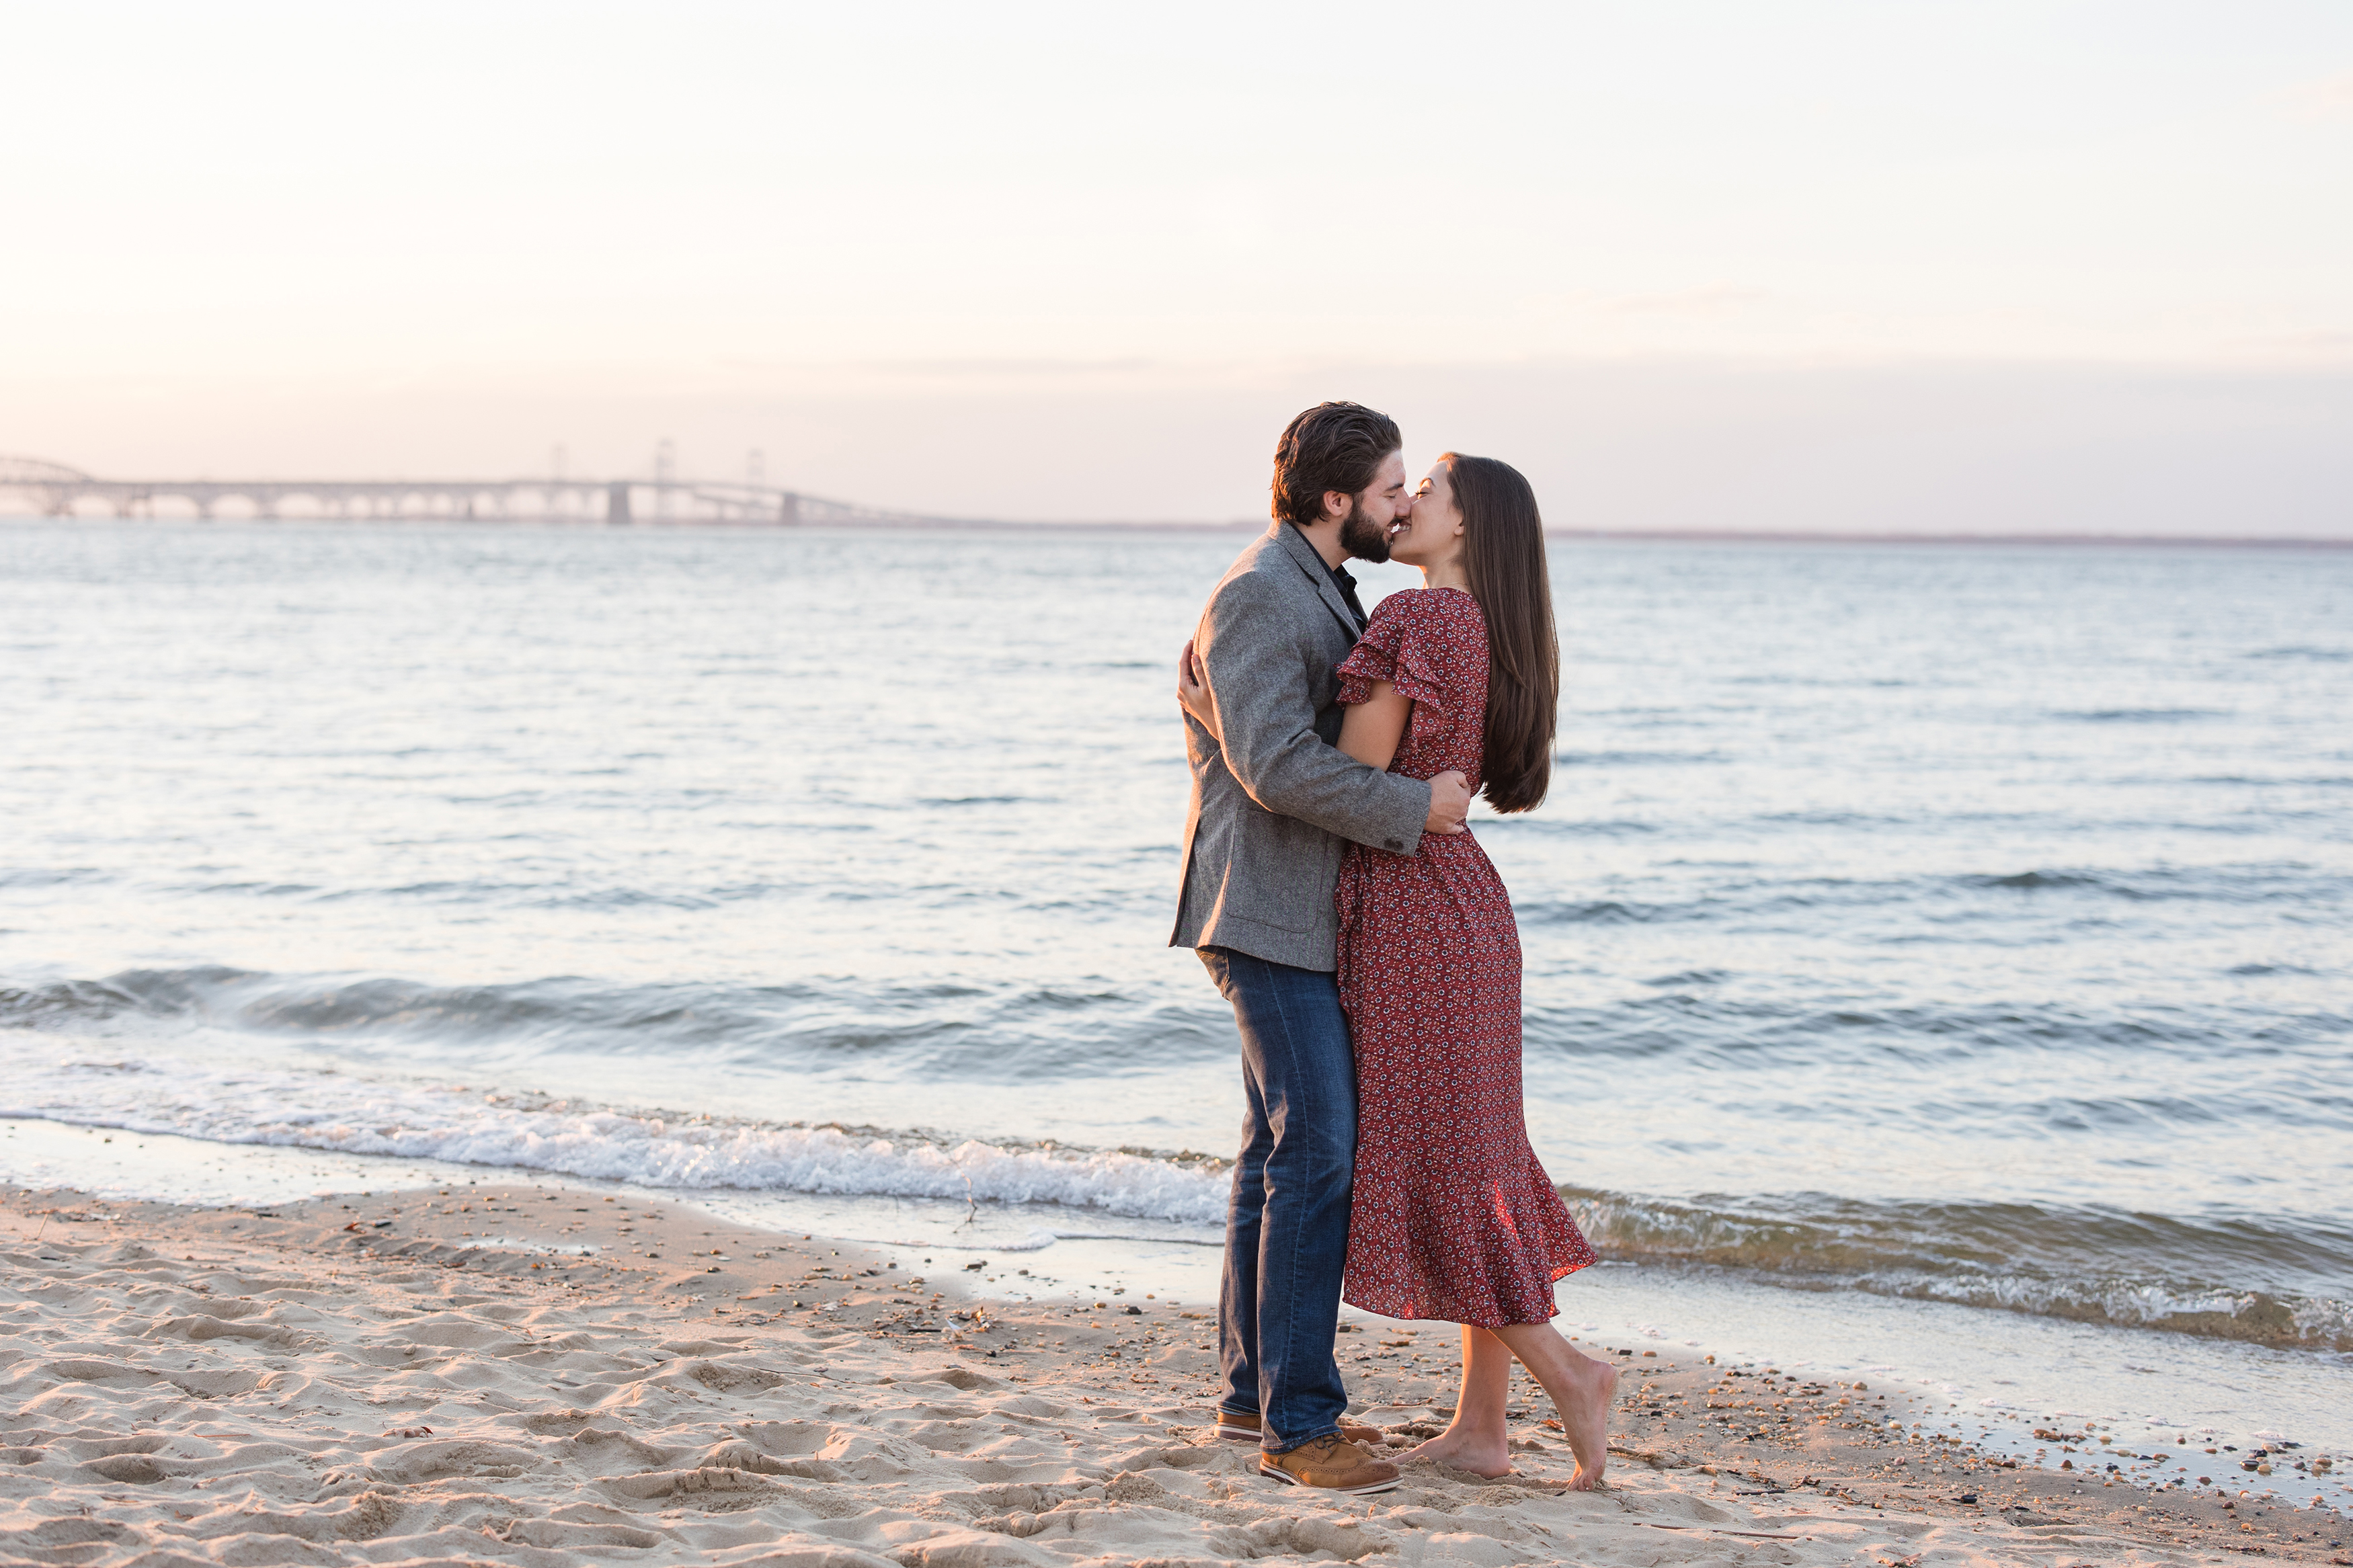 Fall Terrapin Beach Park engagement session by Christa Rae Photography